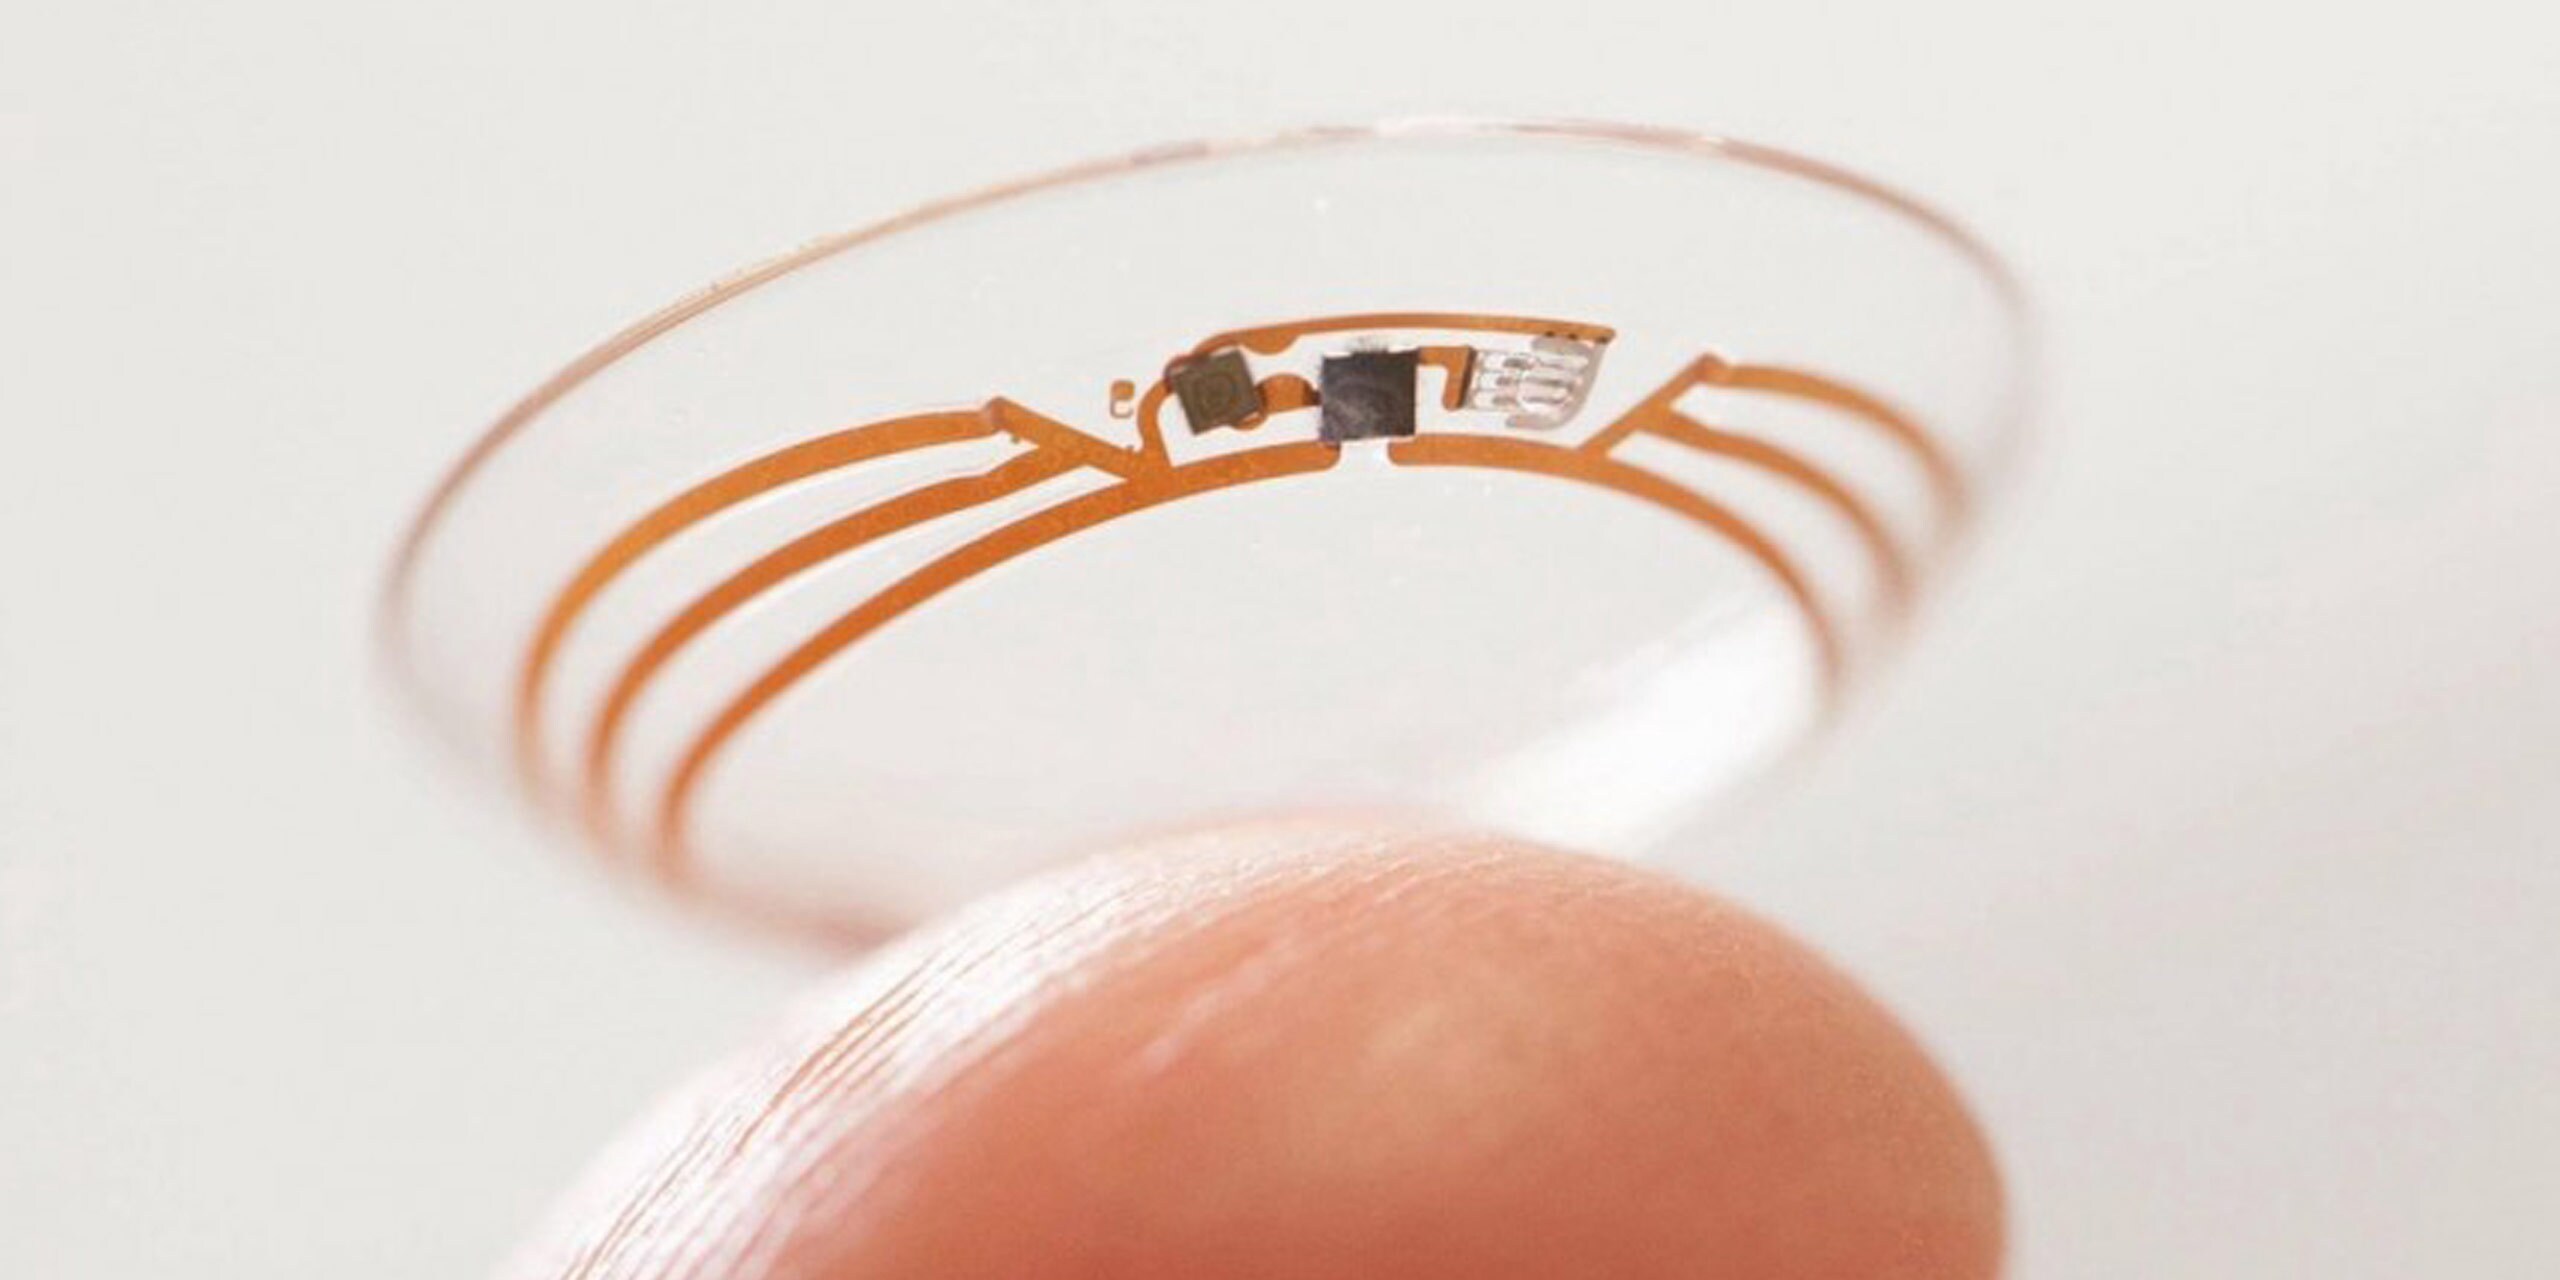 Blood Glucose Contact Lens